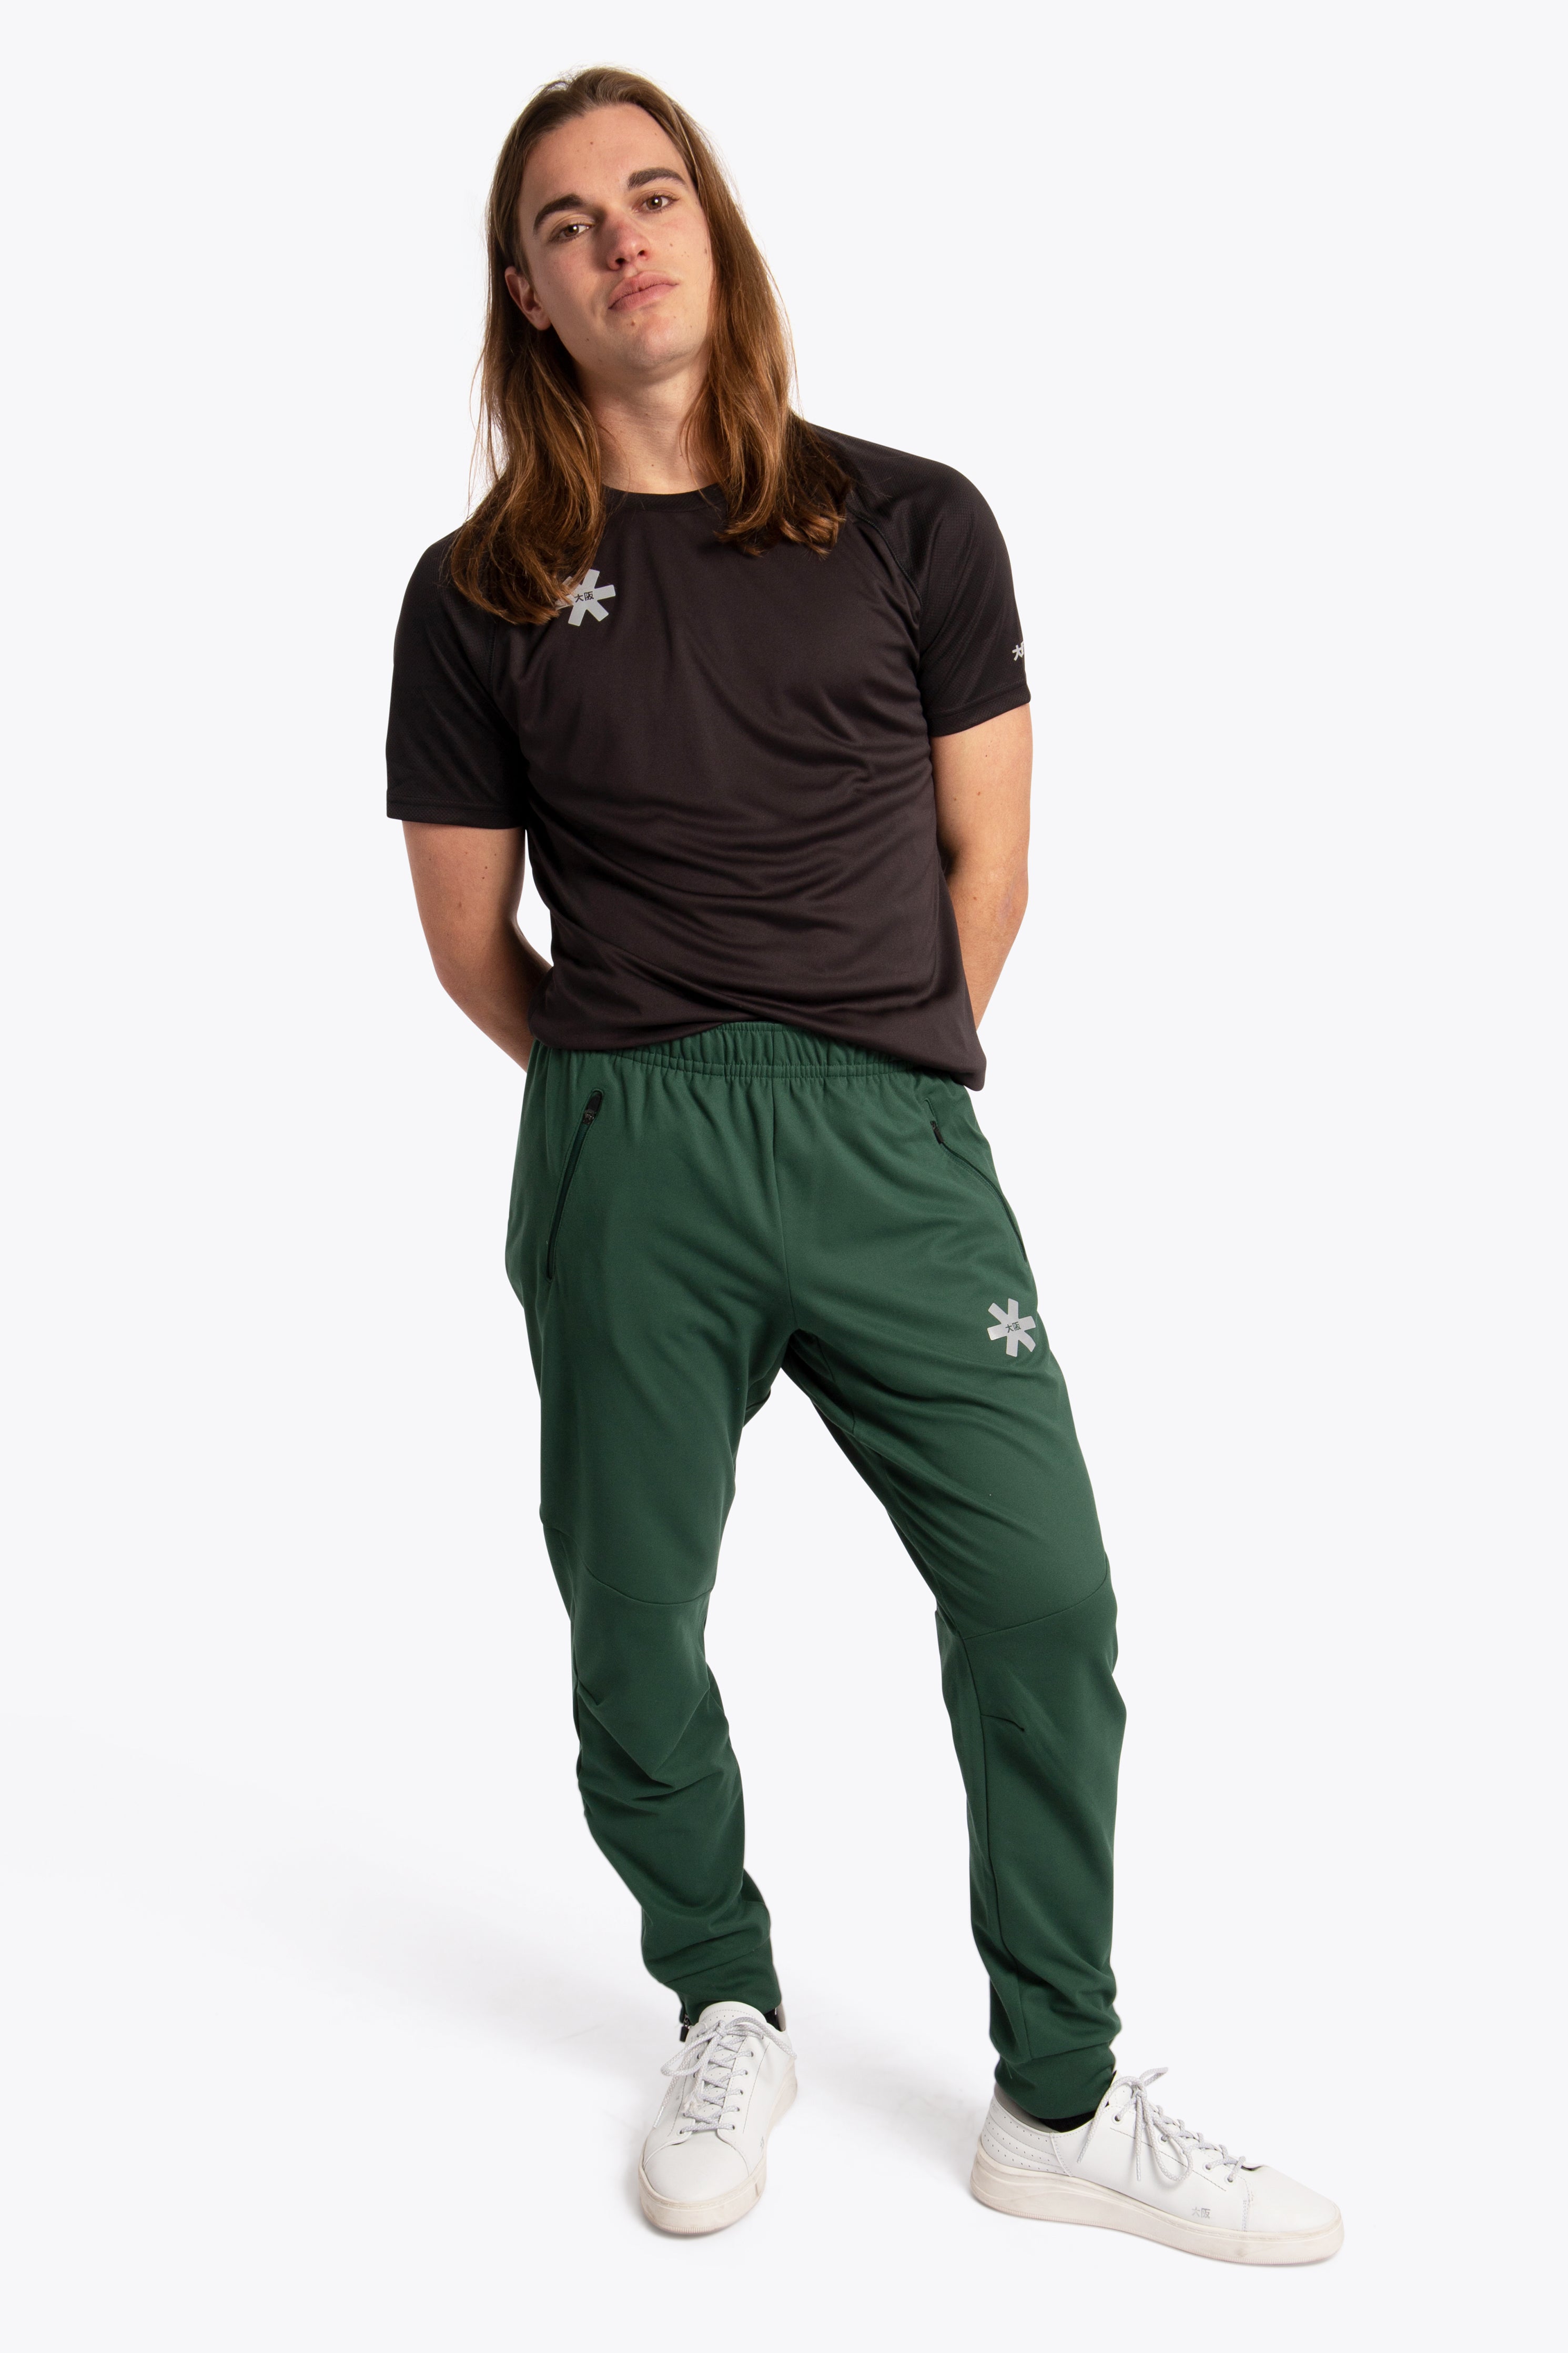 starly track pants and t-shirt combo - fashion fiver